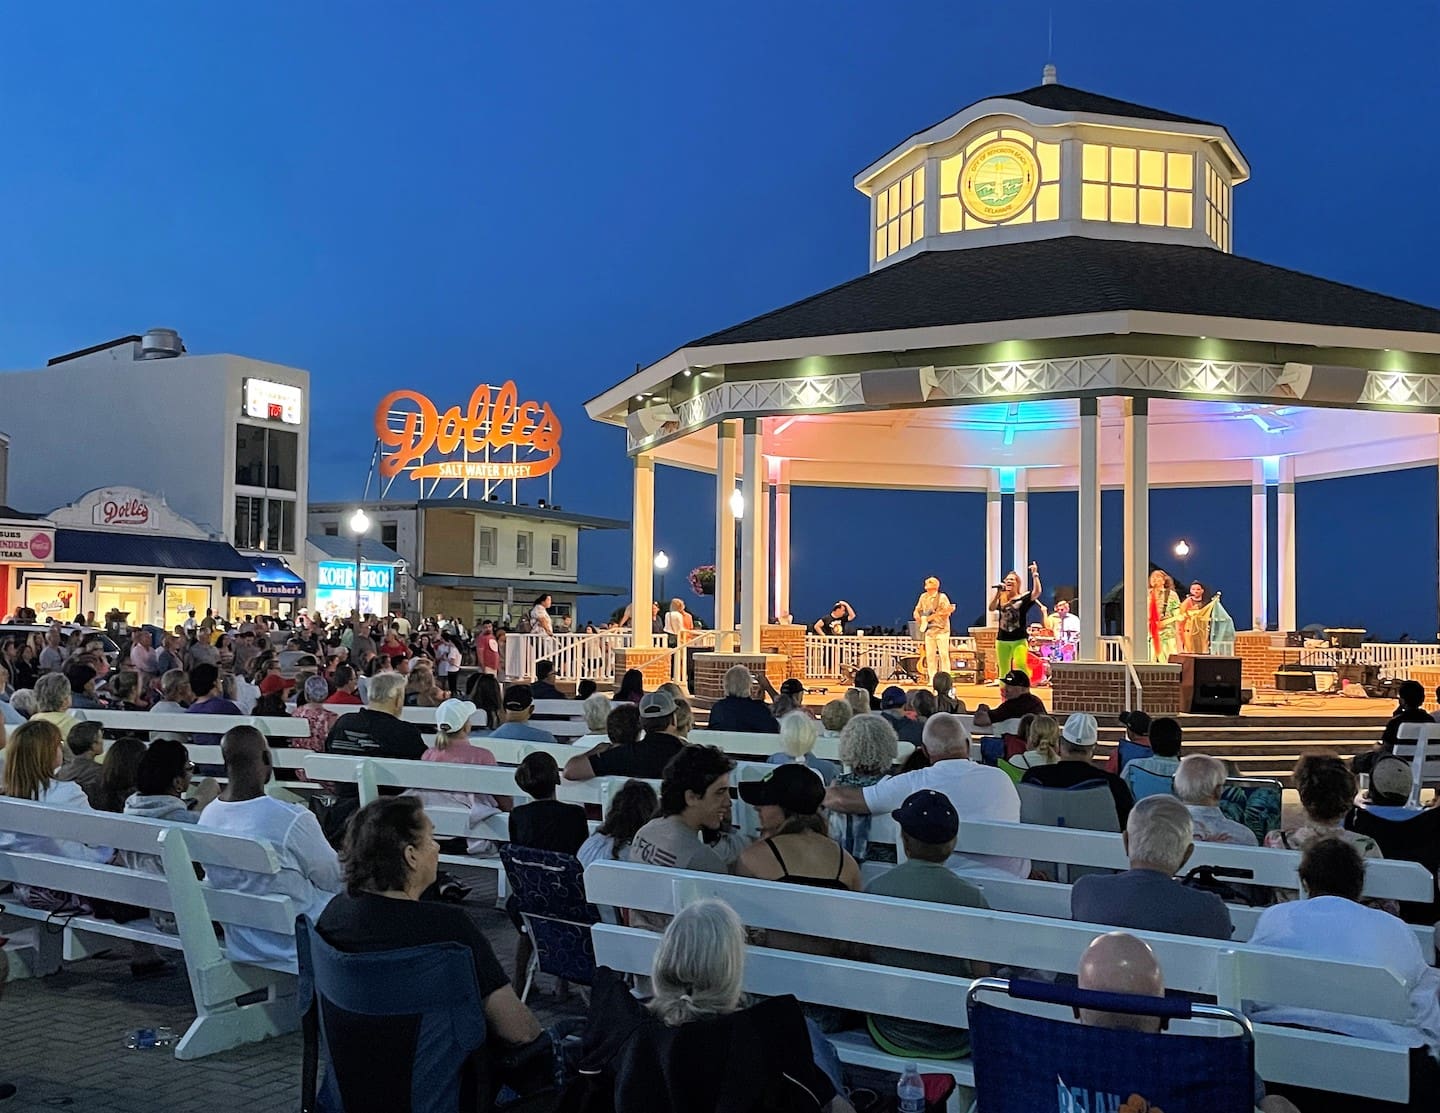 Free summer concerts have been going on for decades at the Rehoboth Beach Bandstand. (City of Rehoboth Beach photo)